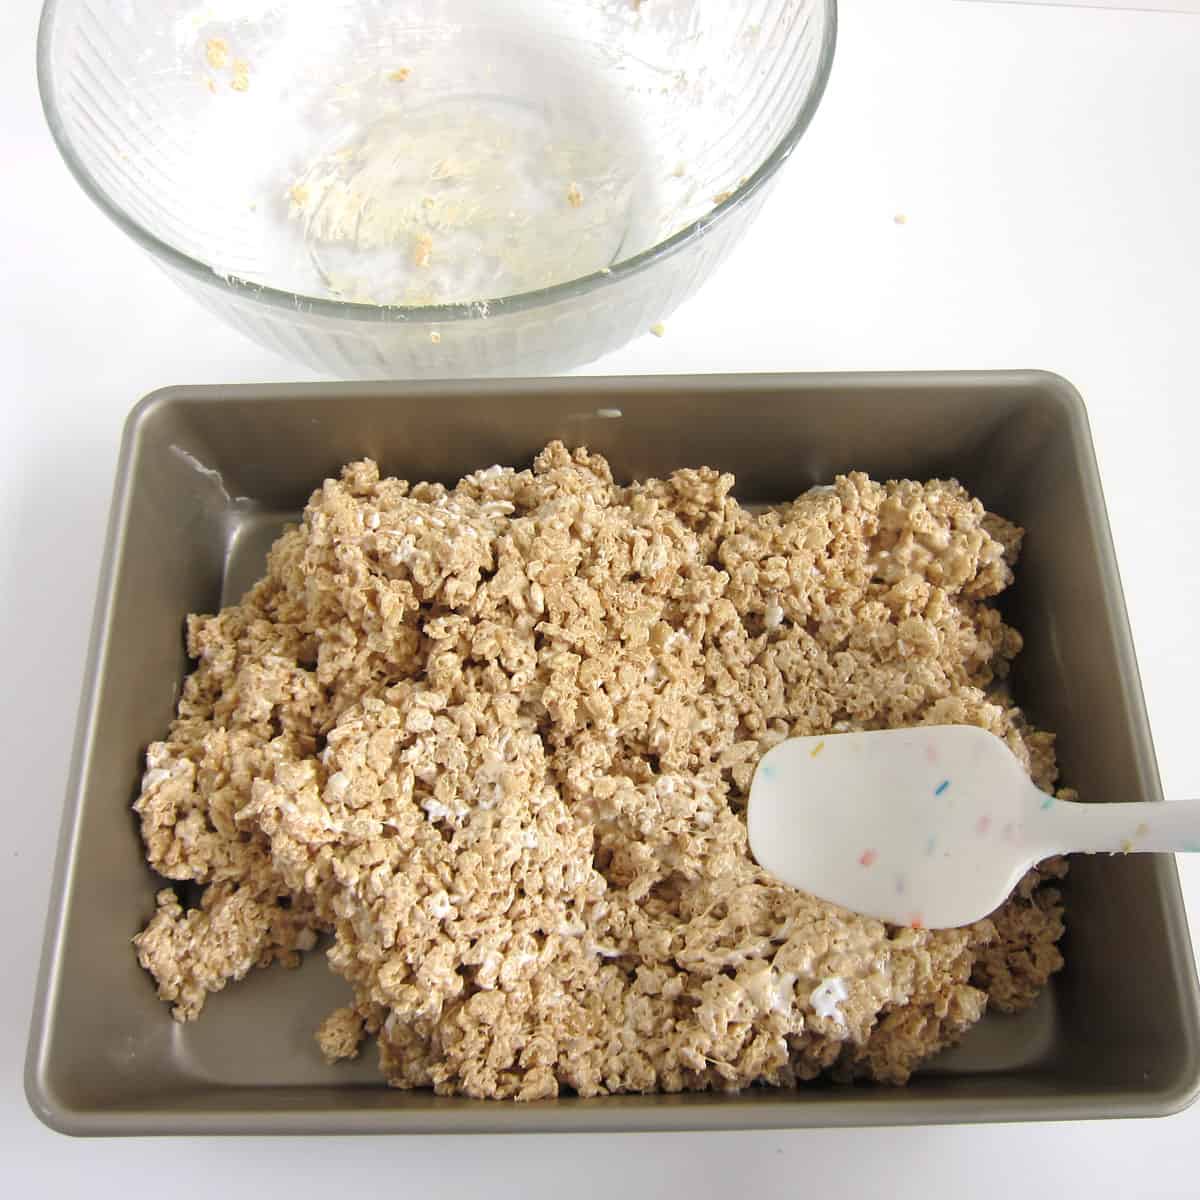 spreading the peanut butter marshmallow cereal treat mixture into a greased 9x13-inch pan.